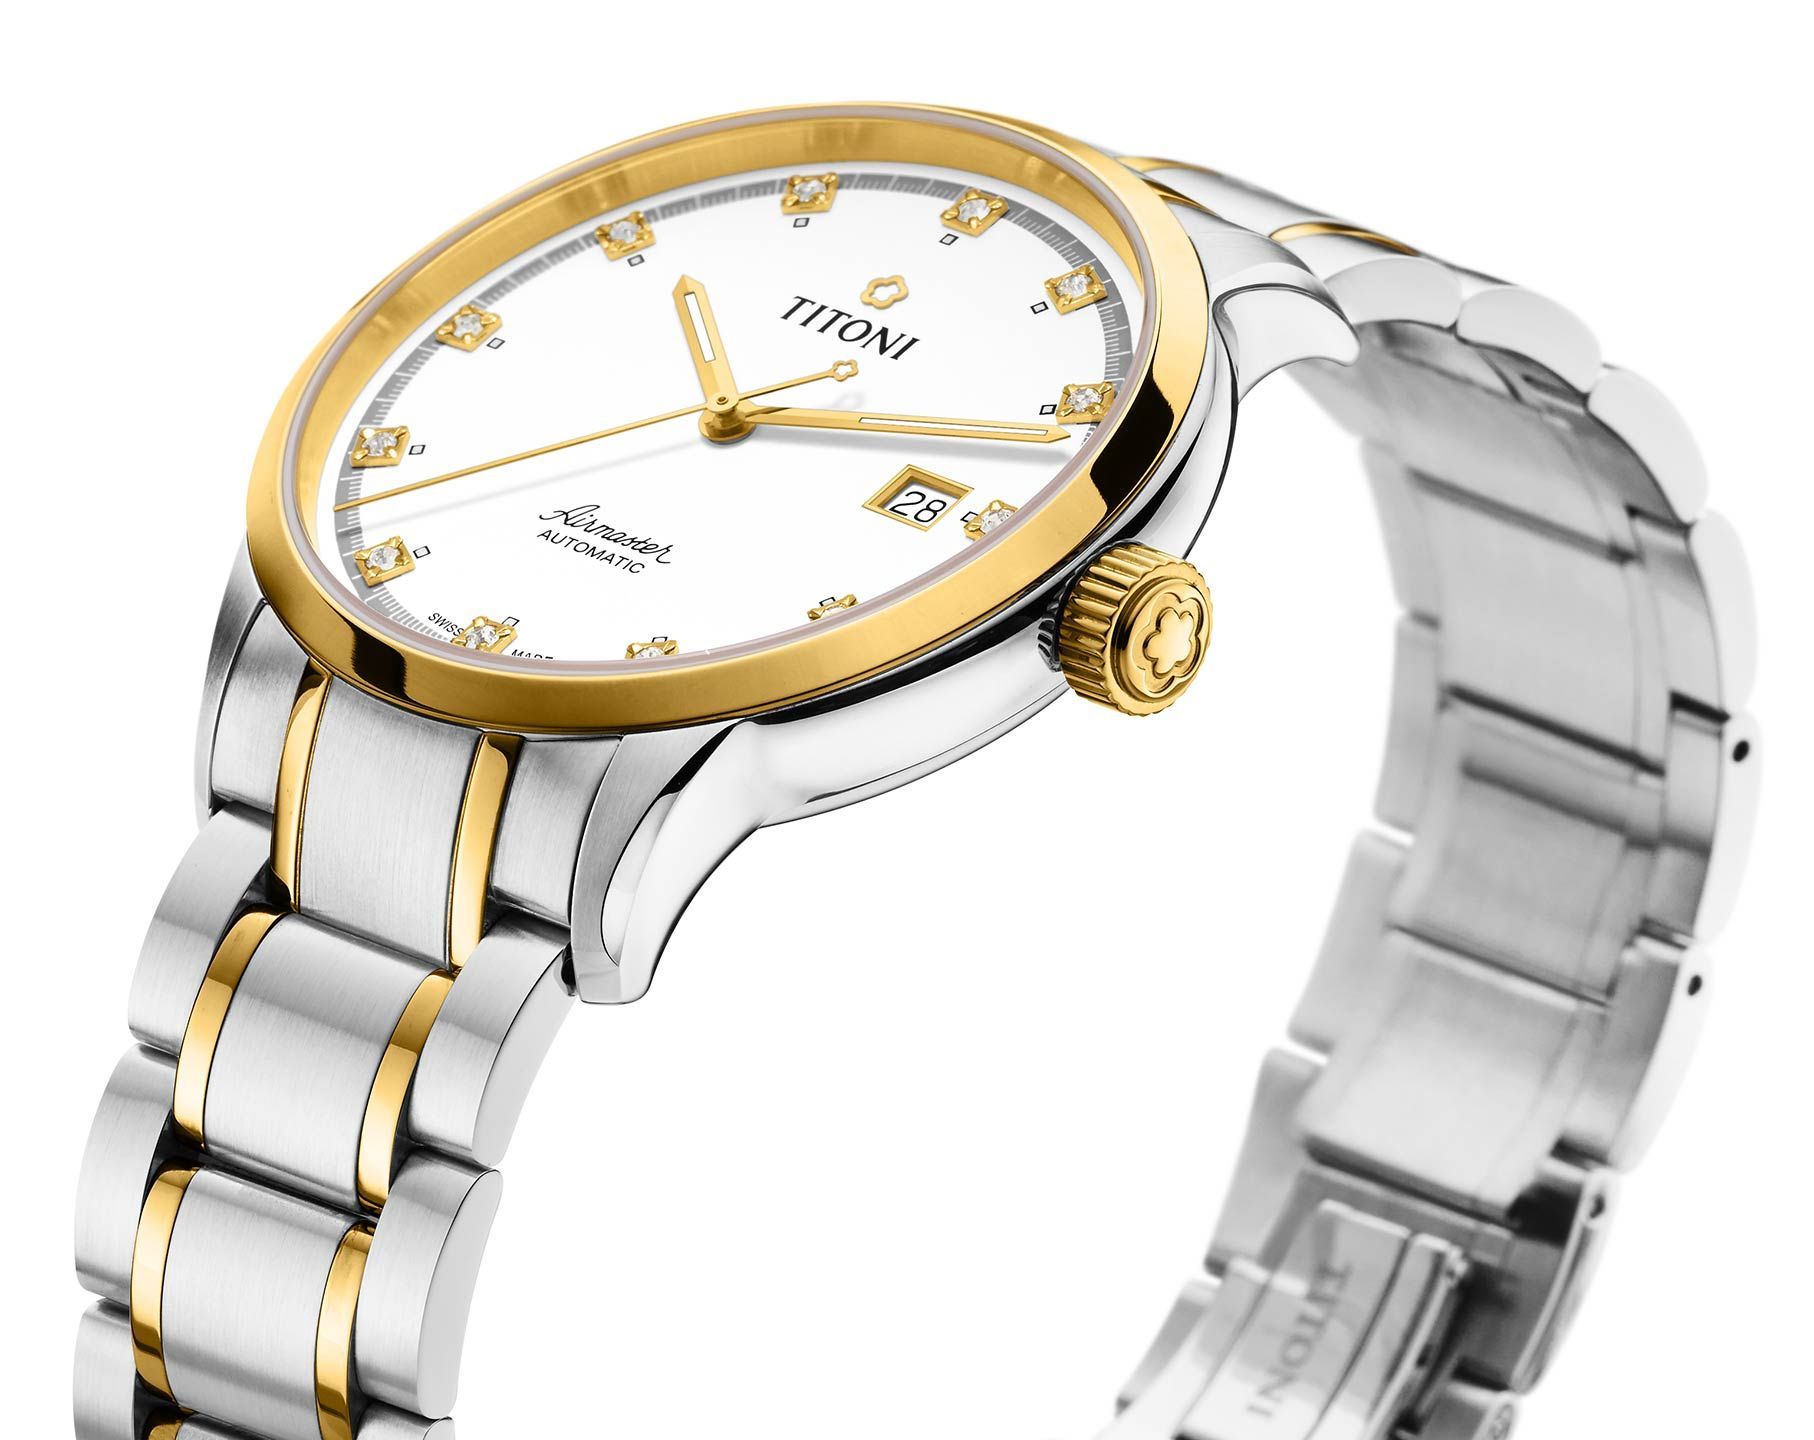 Titoni  40 mm Watch in White Dial For Men - 4